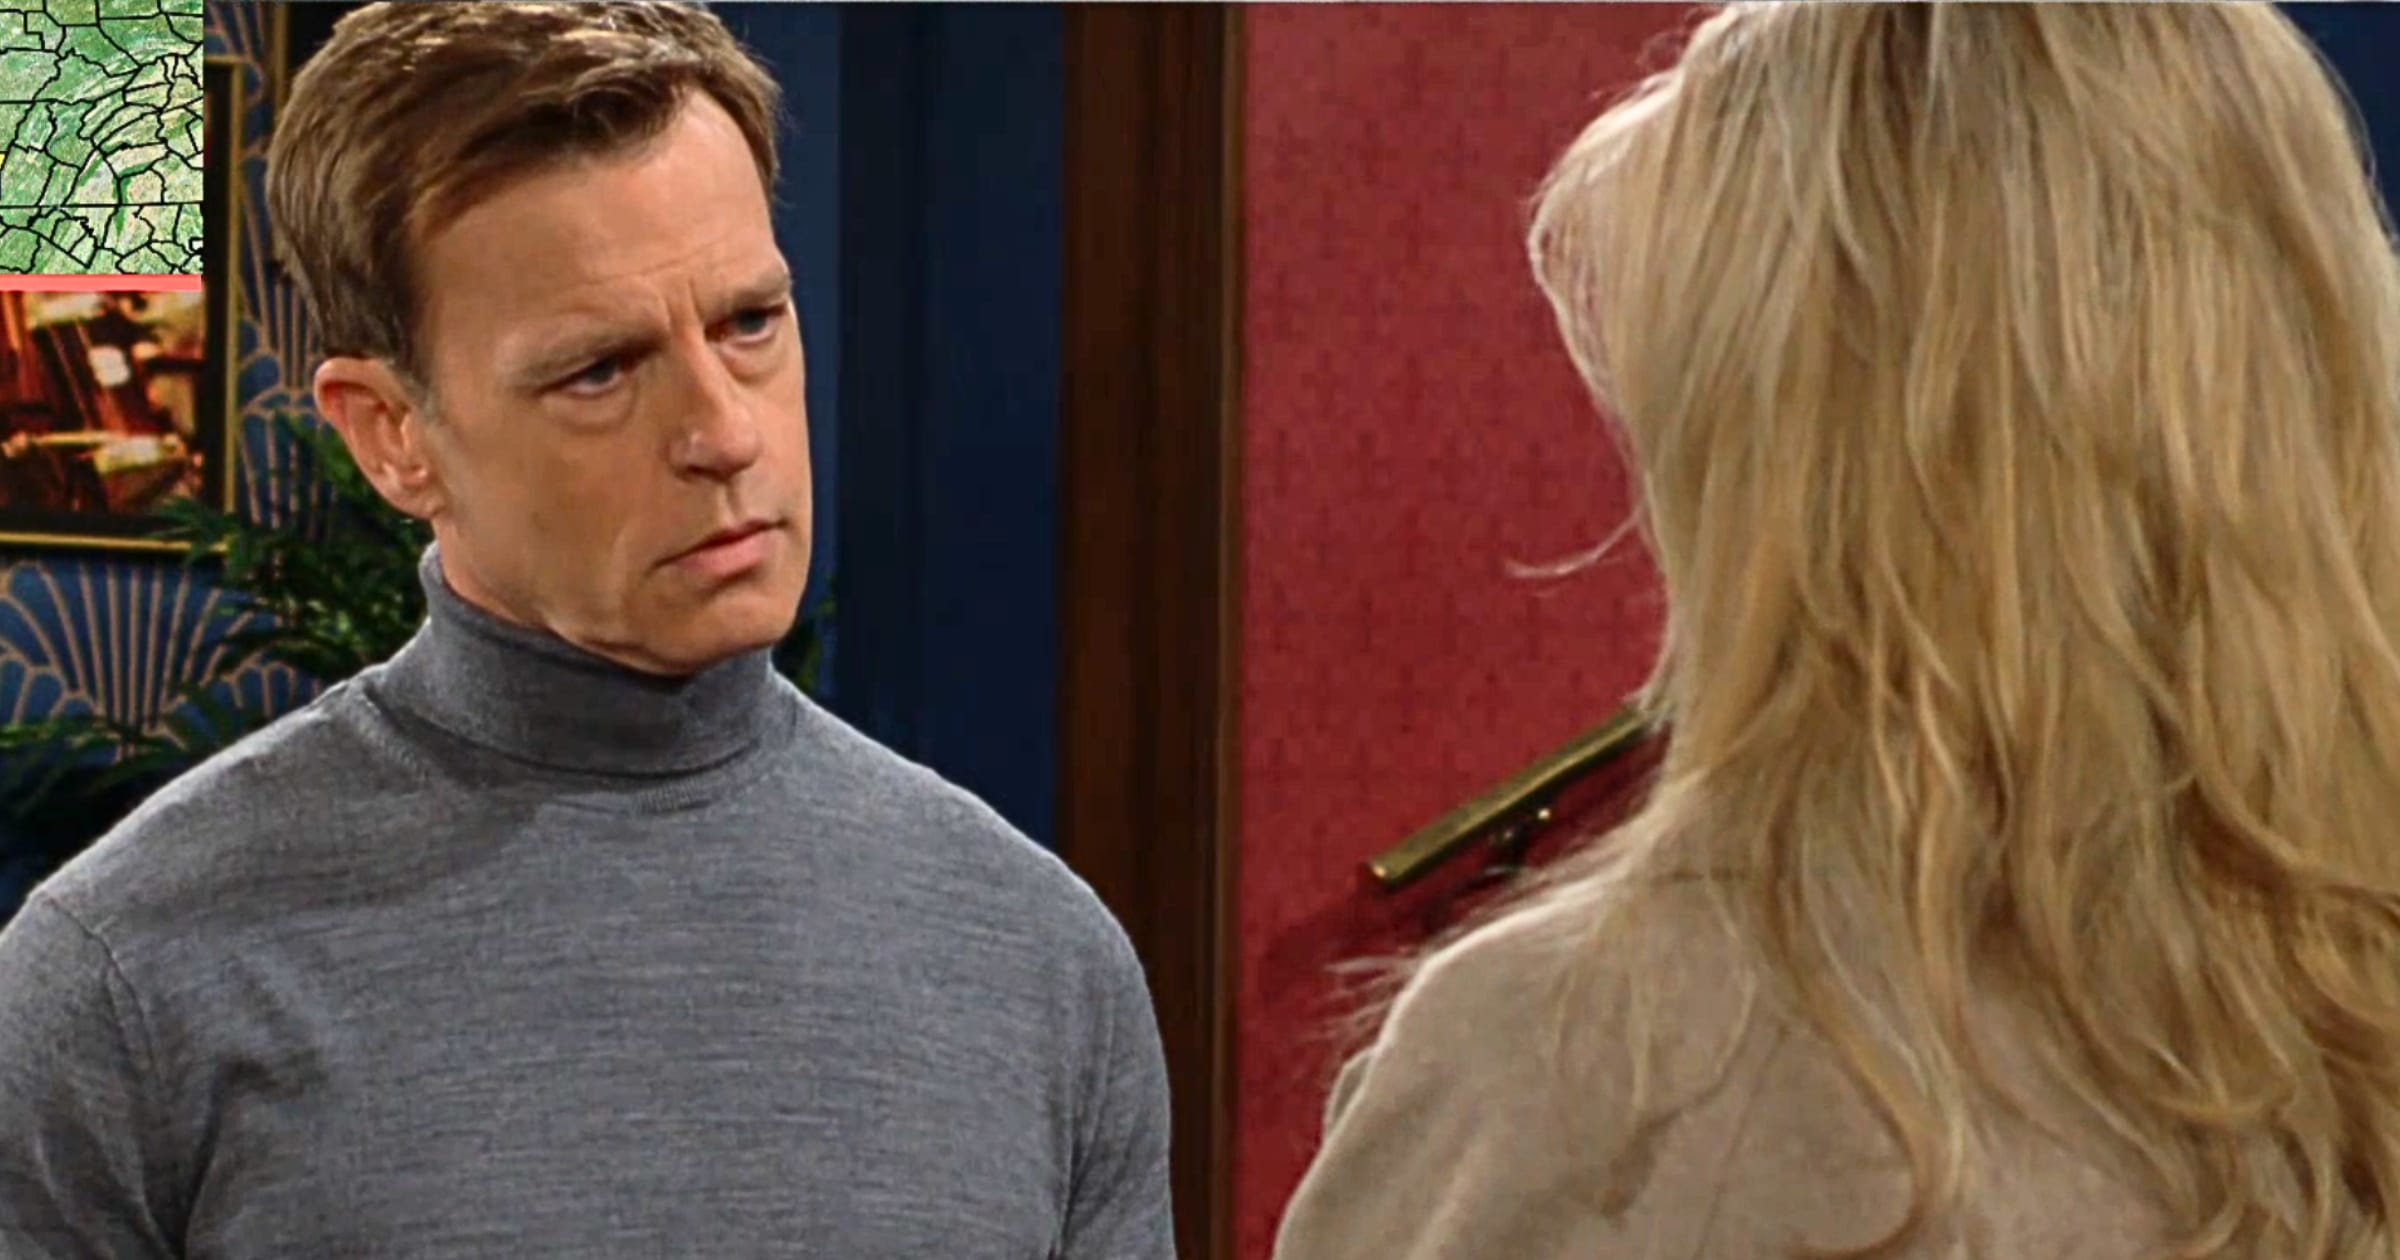 The Young and the Restless - Jan 15-19 - Tucker and Ashley